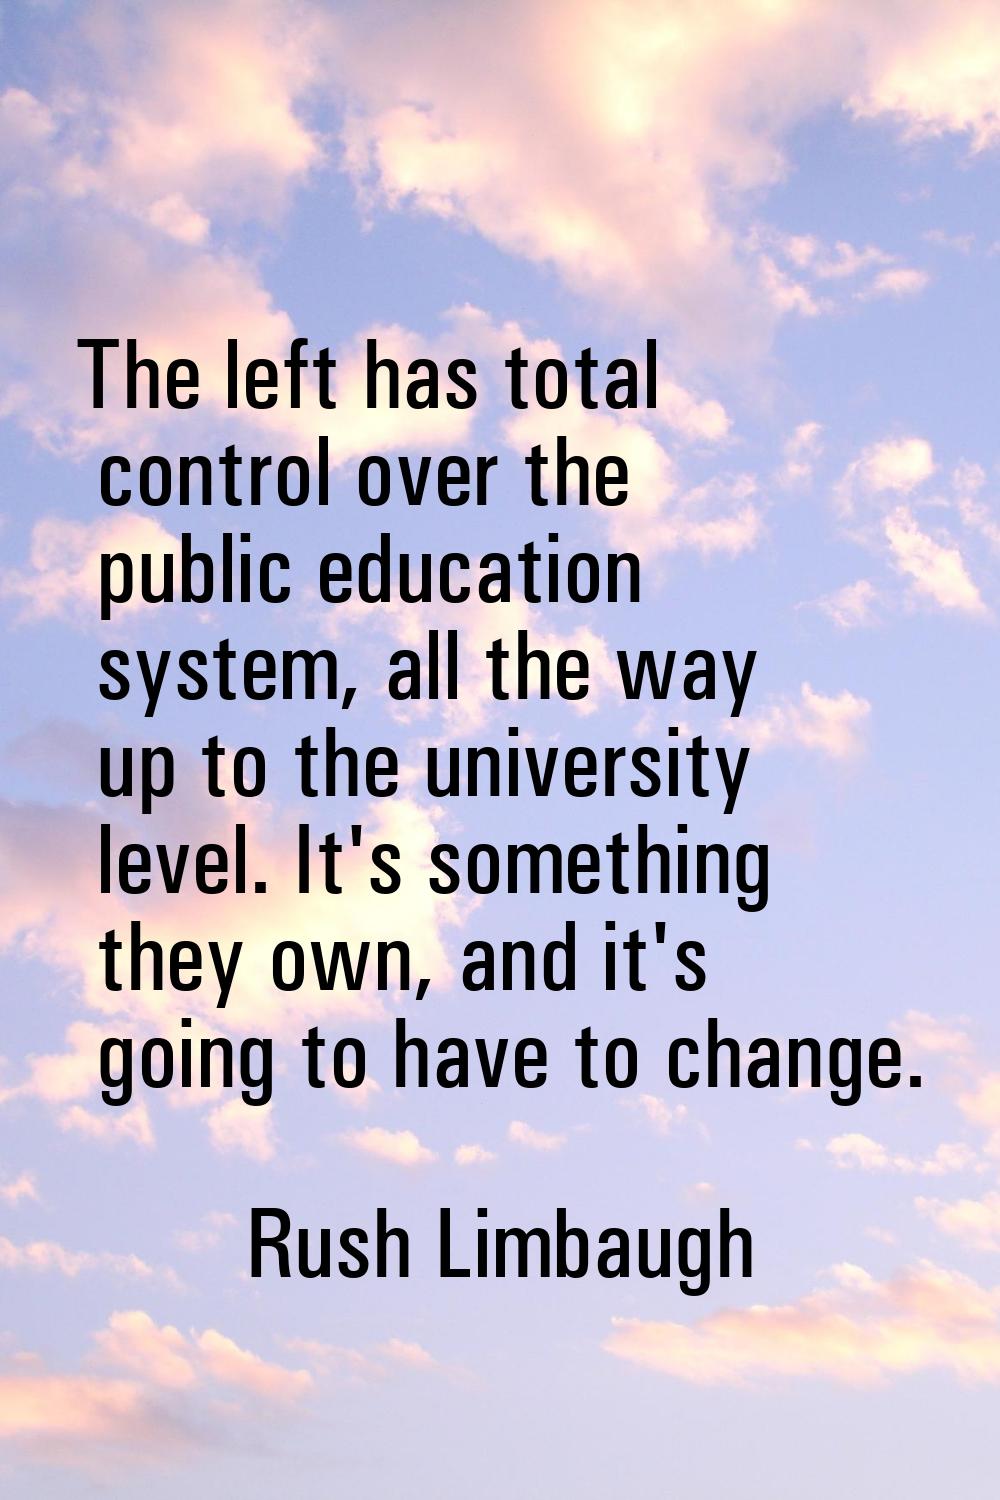 The left has total control over the public education system, all the way up to the university level